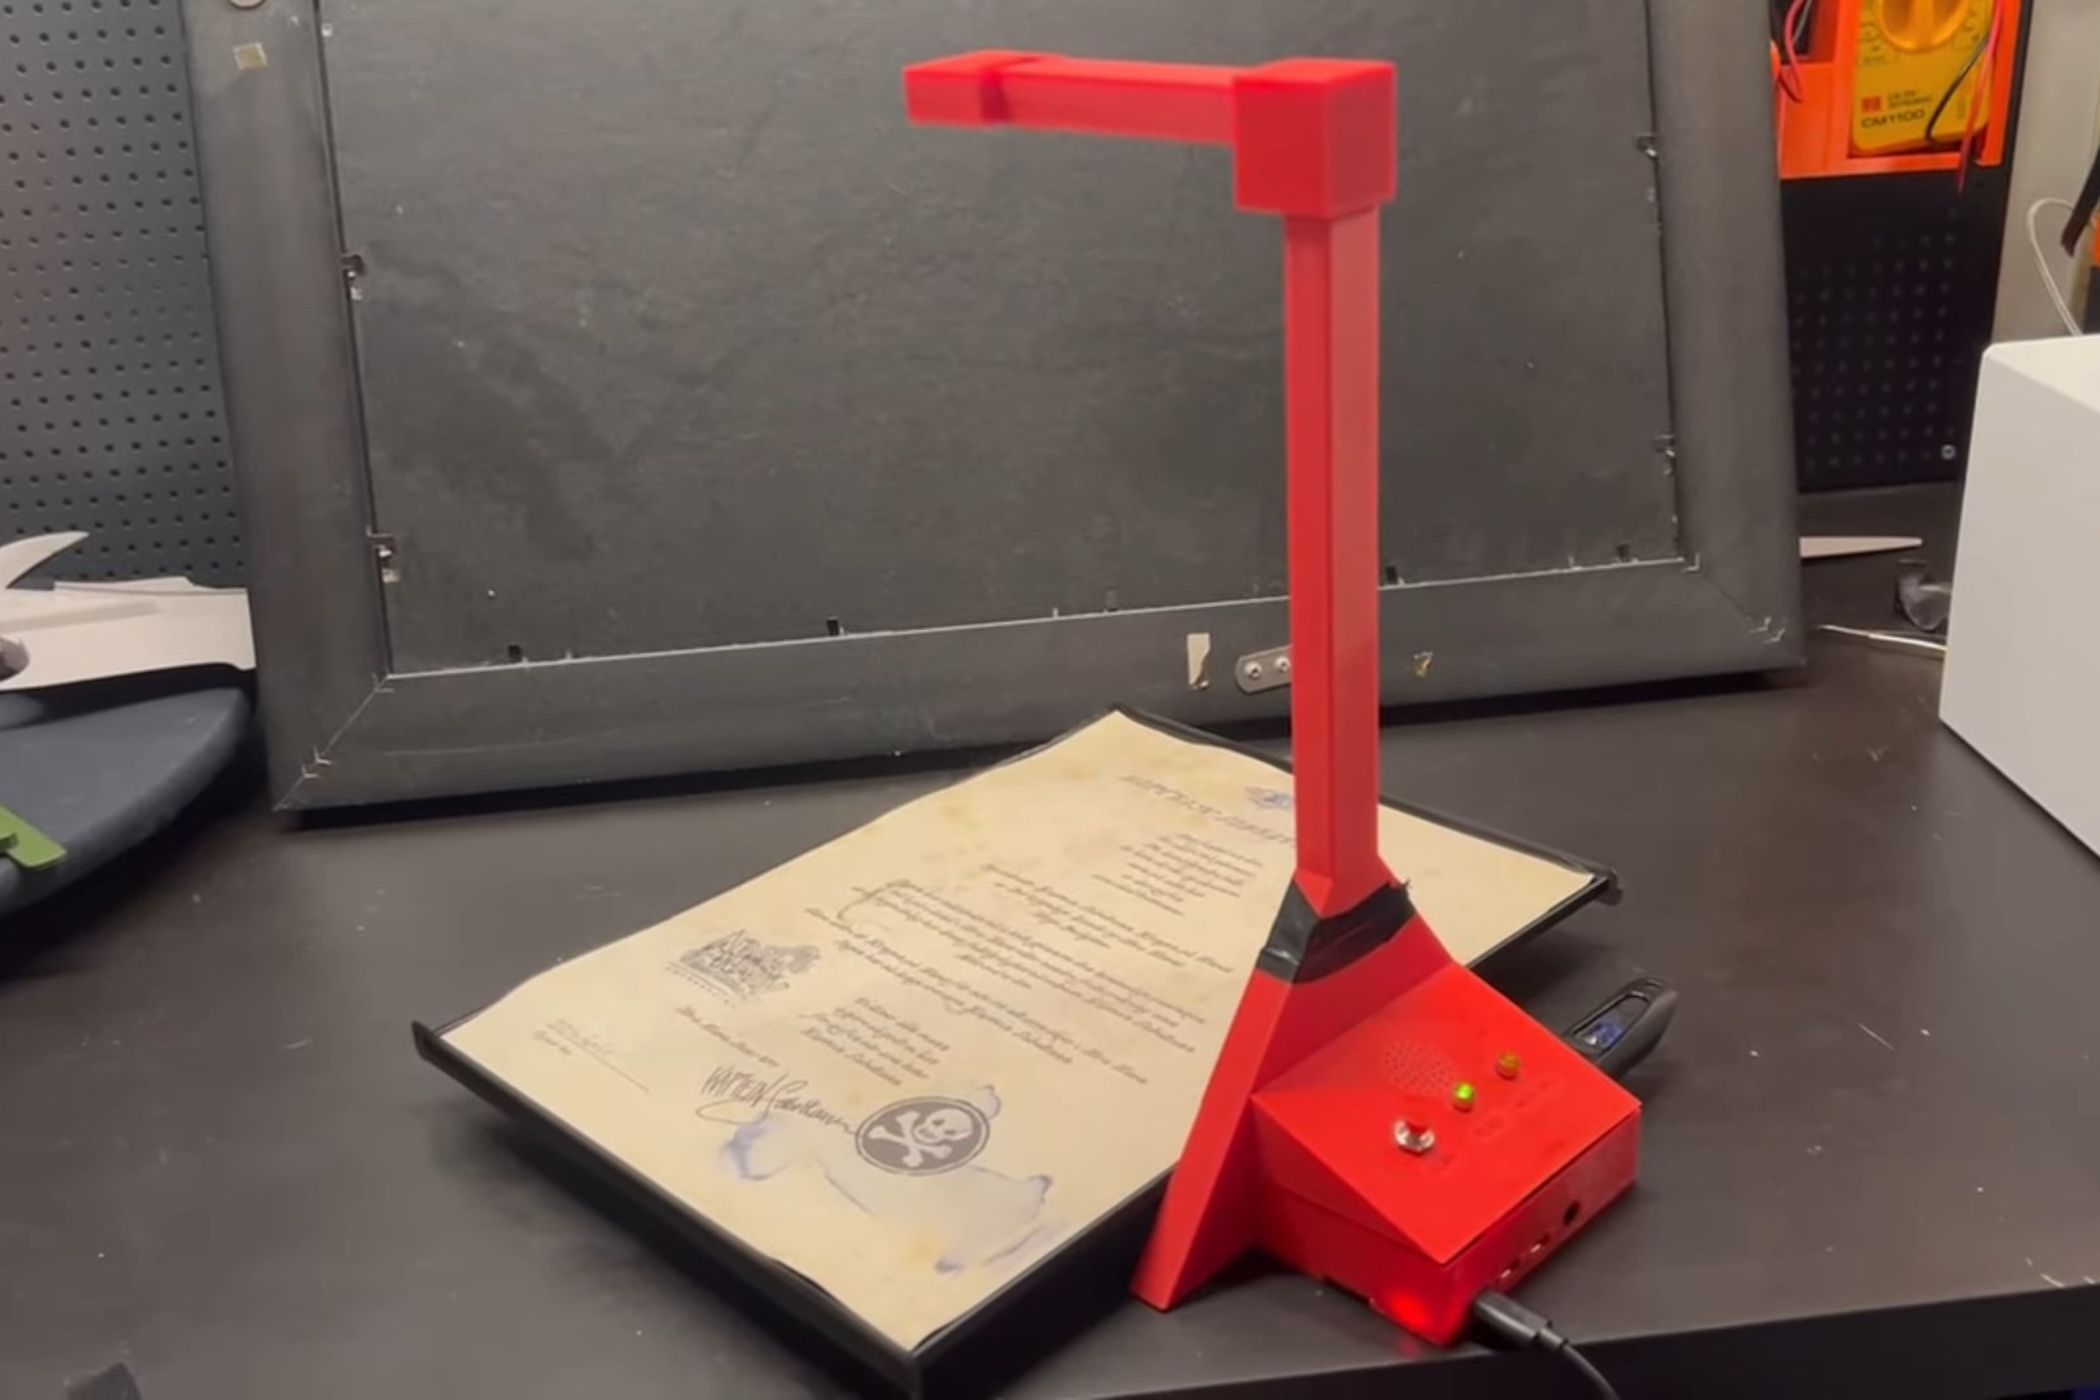 Forget paying for scanners: this genius made one for cheap with a Raspberry Pi